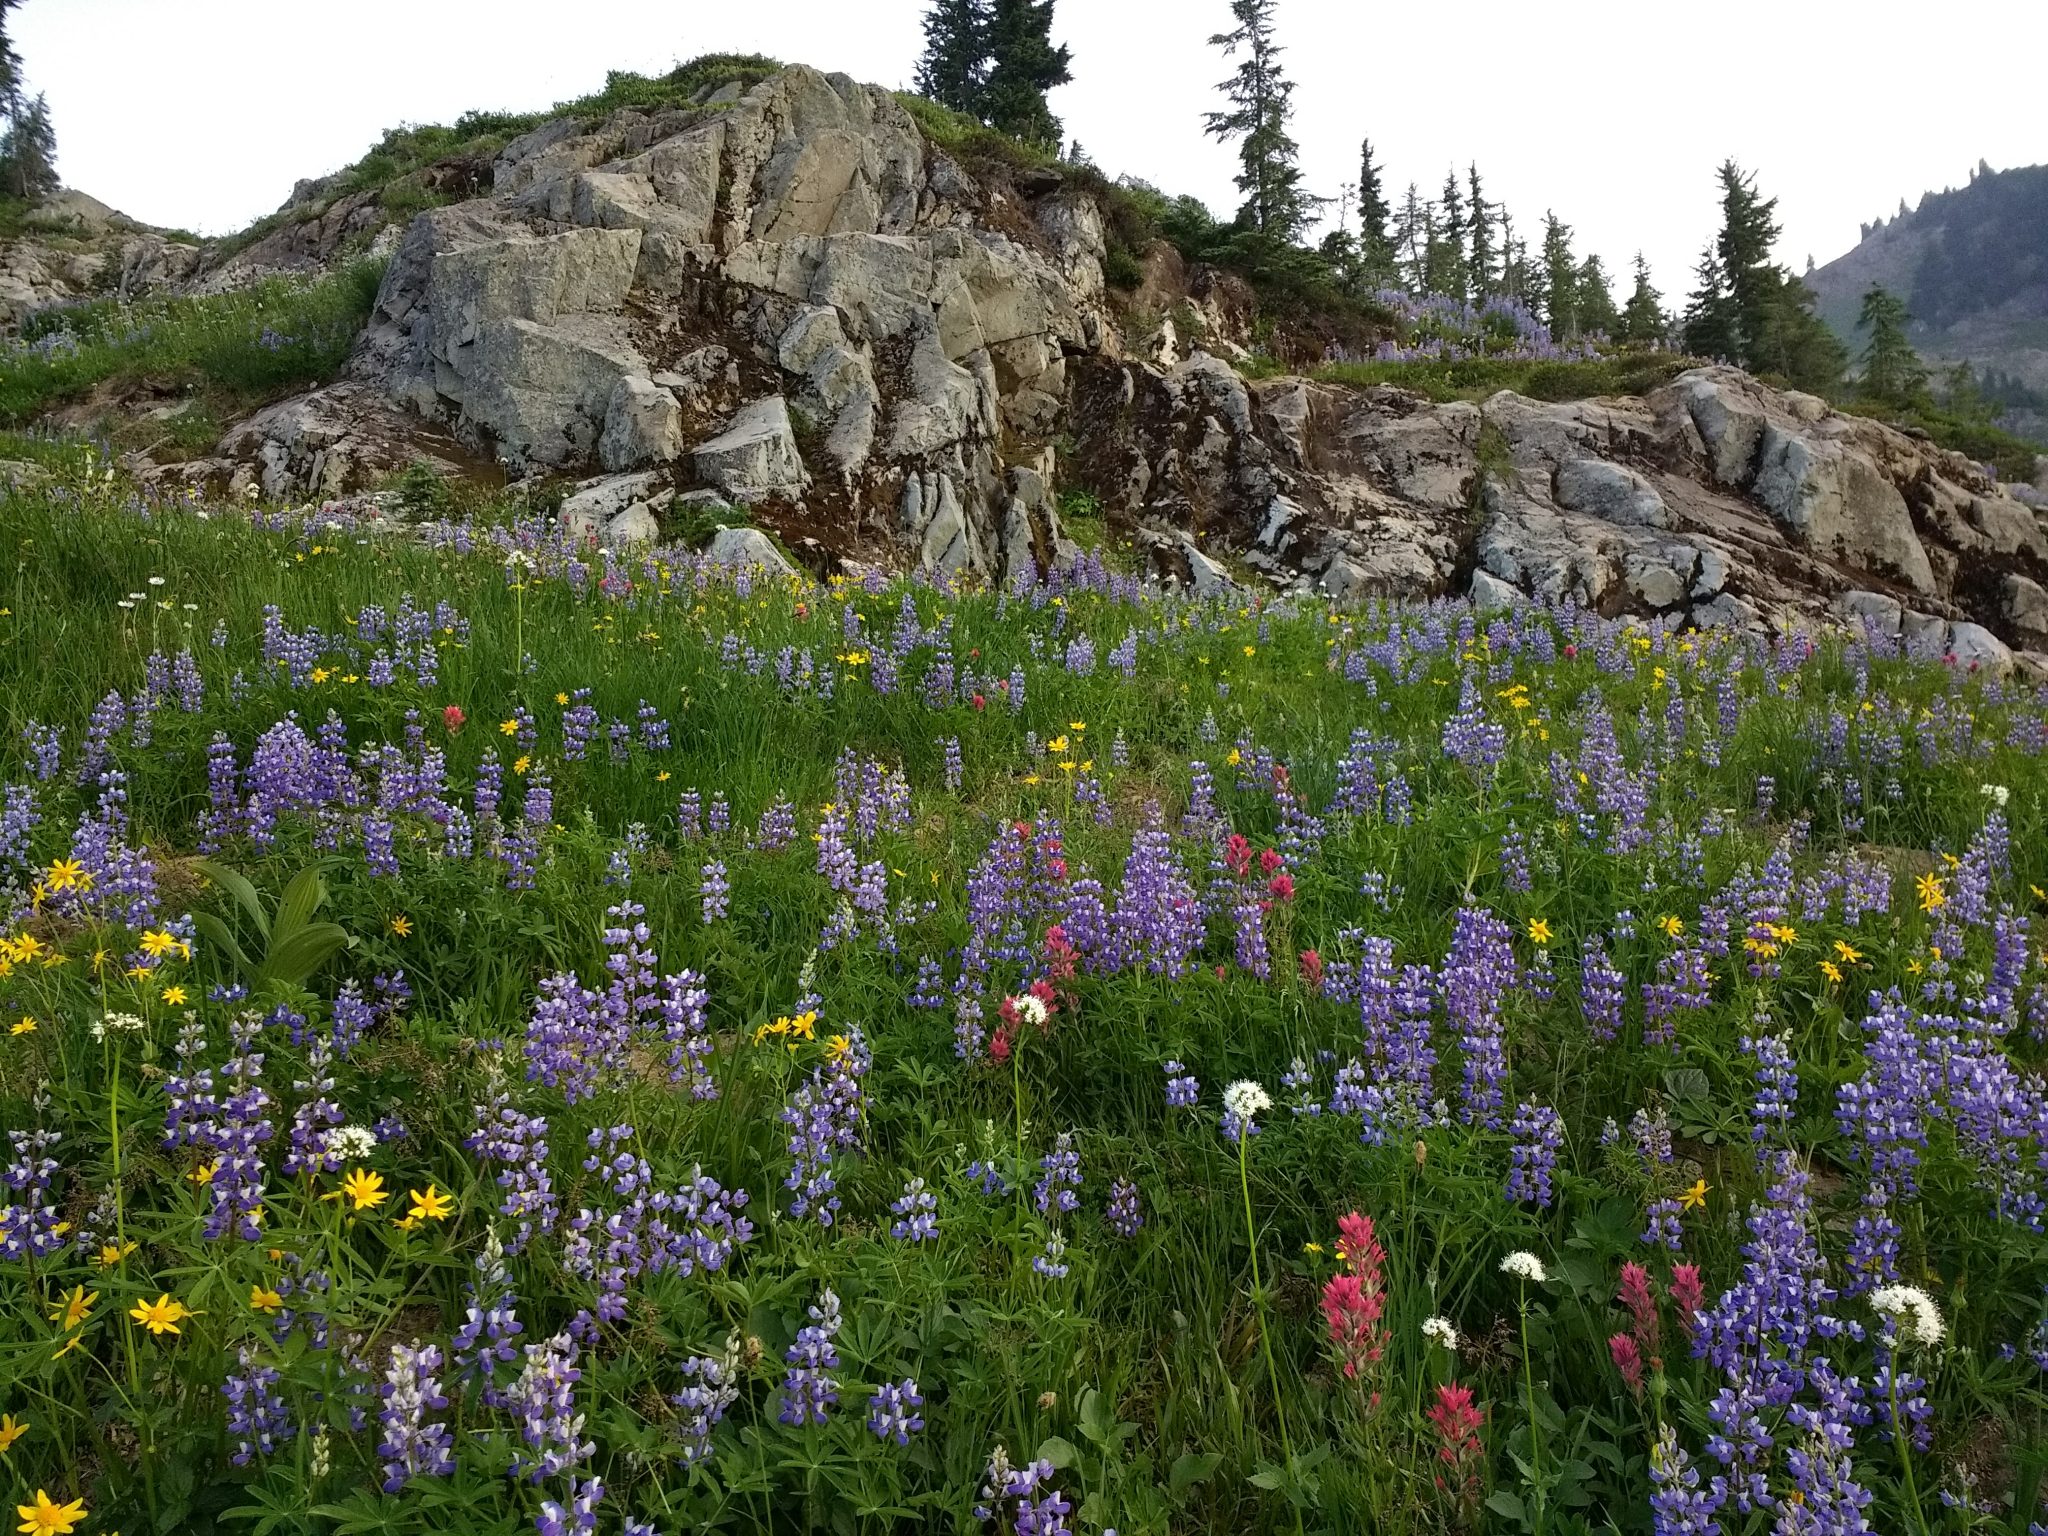 Naches loop trail hike in Mt Rainier National Park has many fields of wildflowers. Here there are purple, pink, yellow and white wildflowers and in the background a rocky cliff with evergreen trees on it.